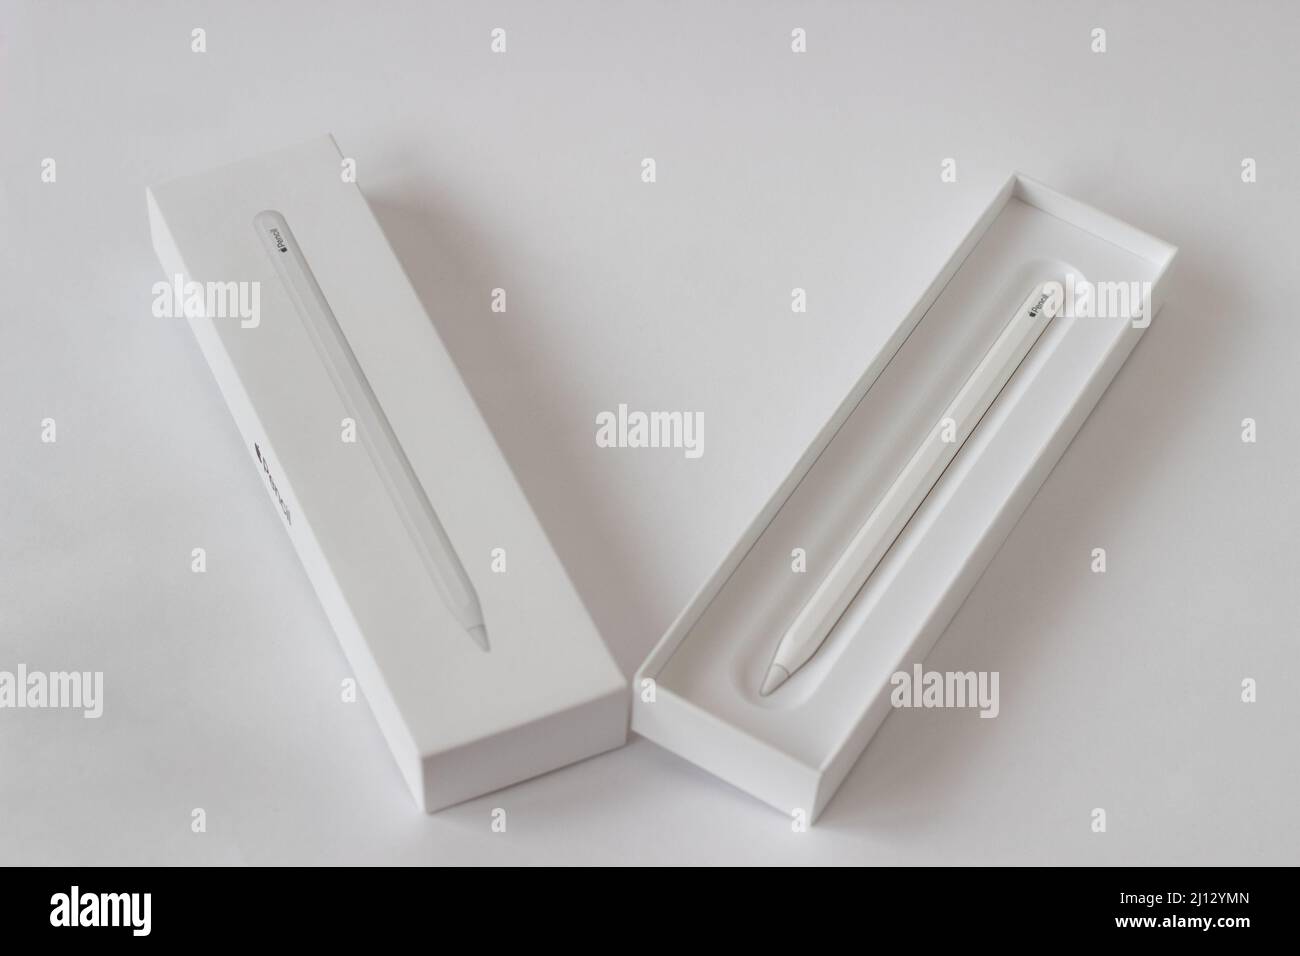 Berlin, Germany - 03.12.2022: Apple Pencil 2 stylus for working with iPad tablet Stock Photo